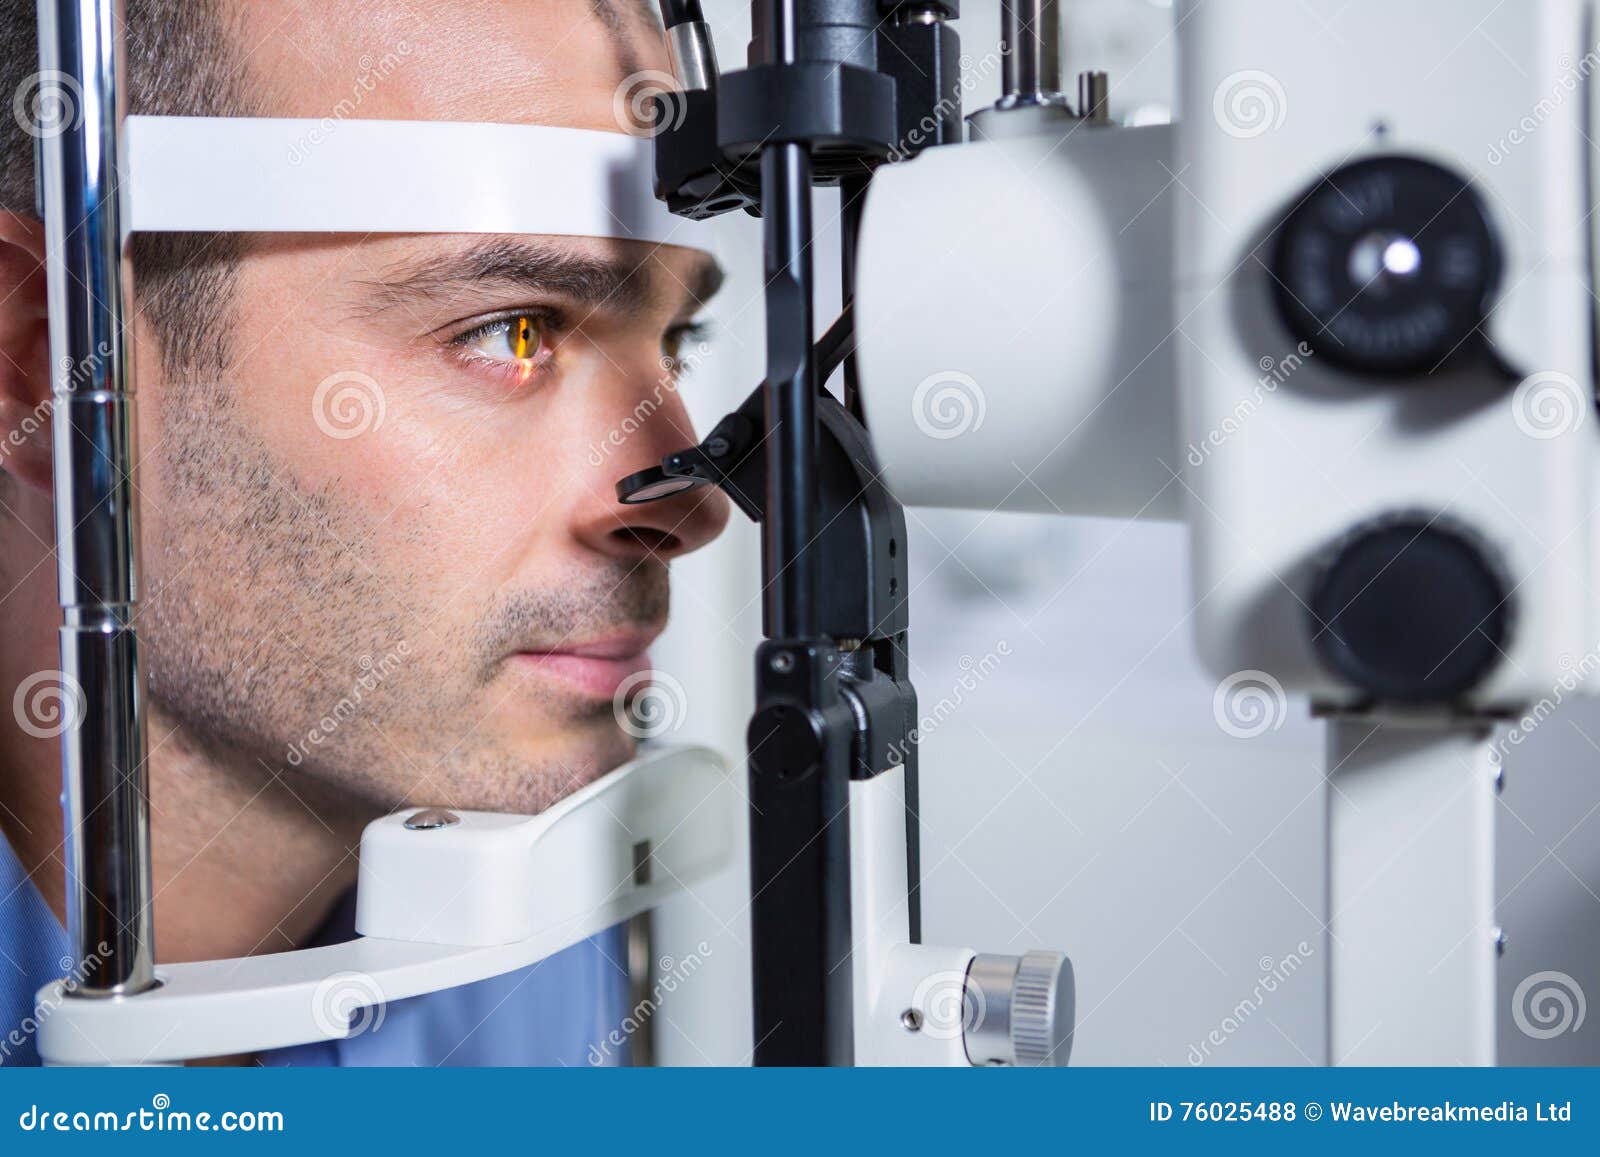 male patient getting his cornea checked with slit lamp